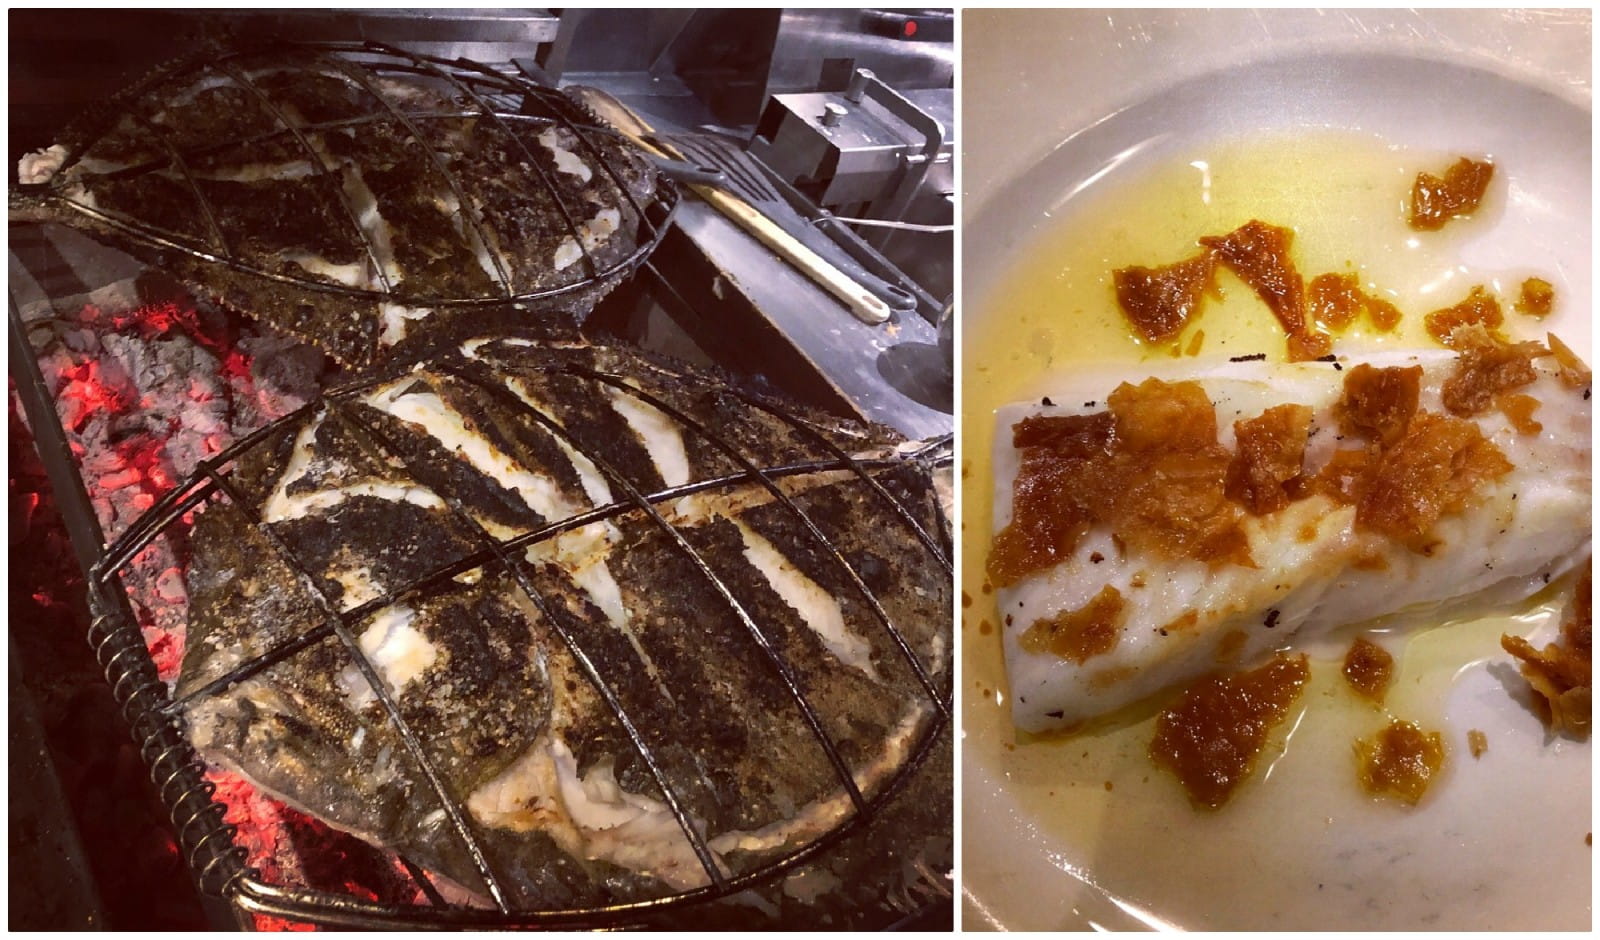 Turbot paired with white Chateauneuf-du-Pape